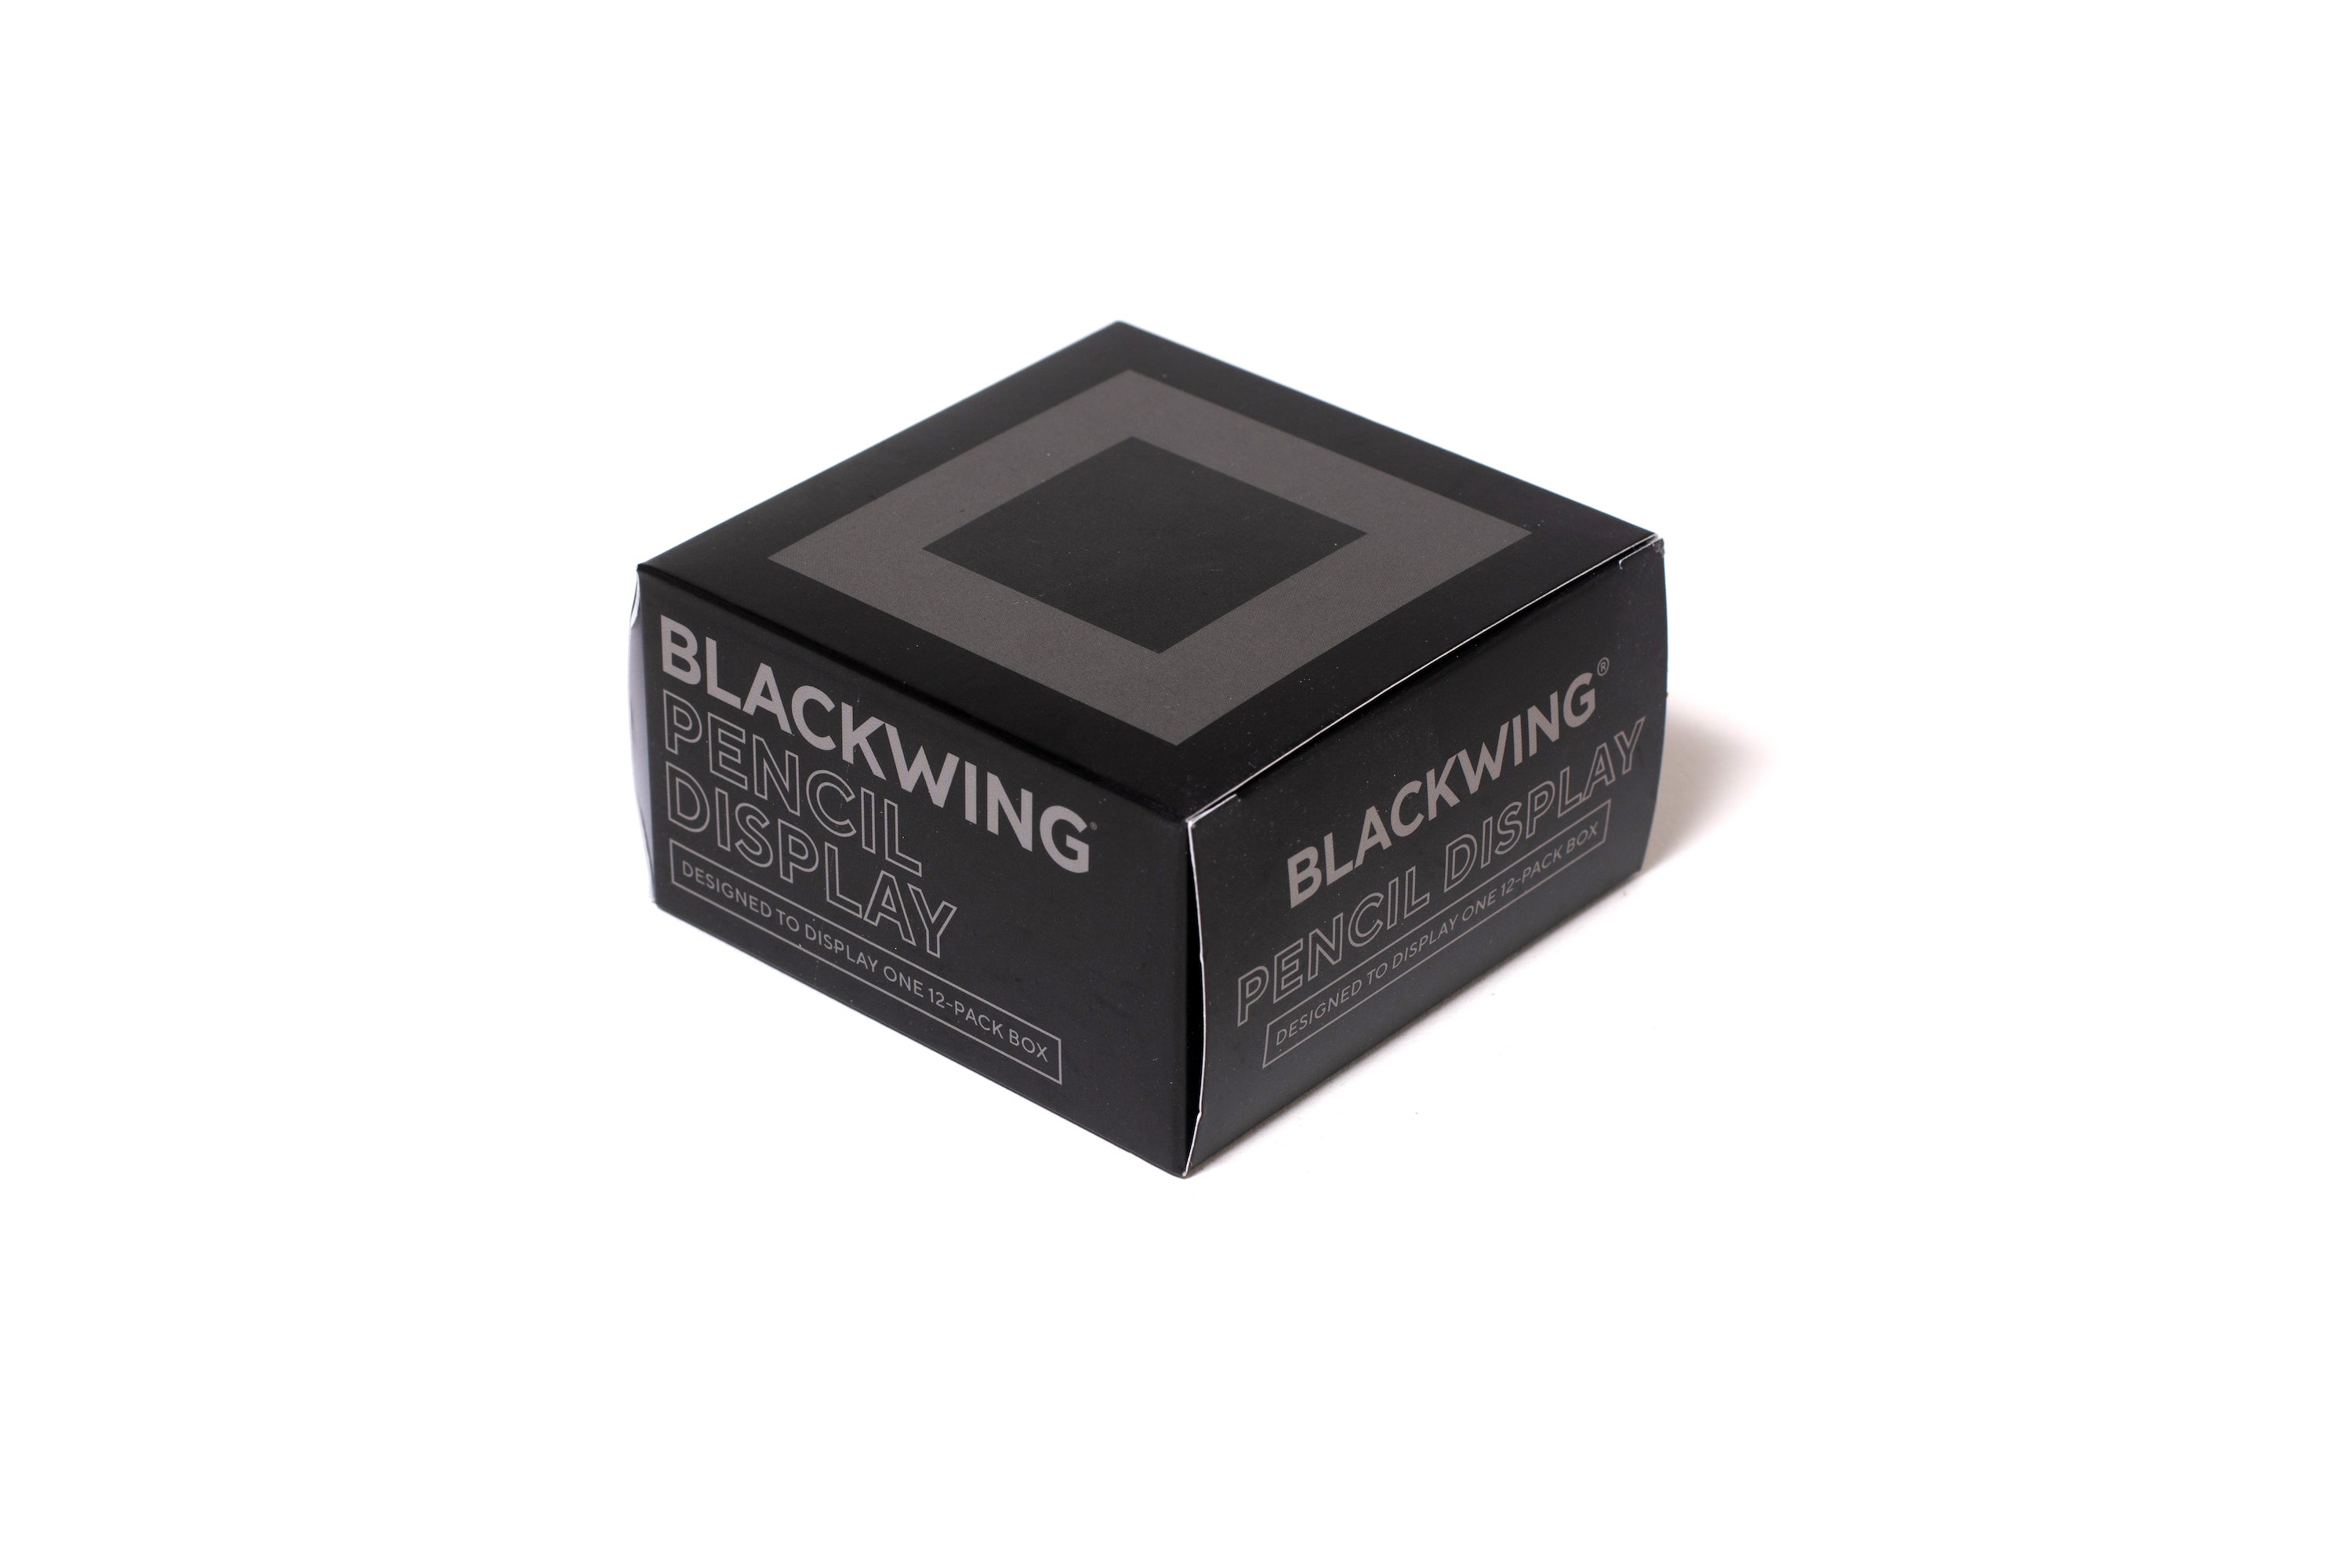 A black Blackwing Upright Box Display with the word "Blackwing" displayed on it.